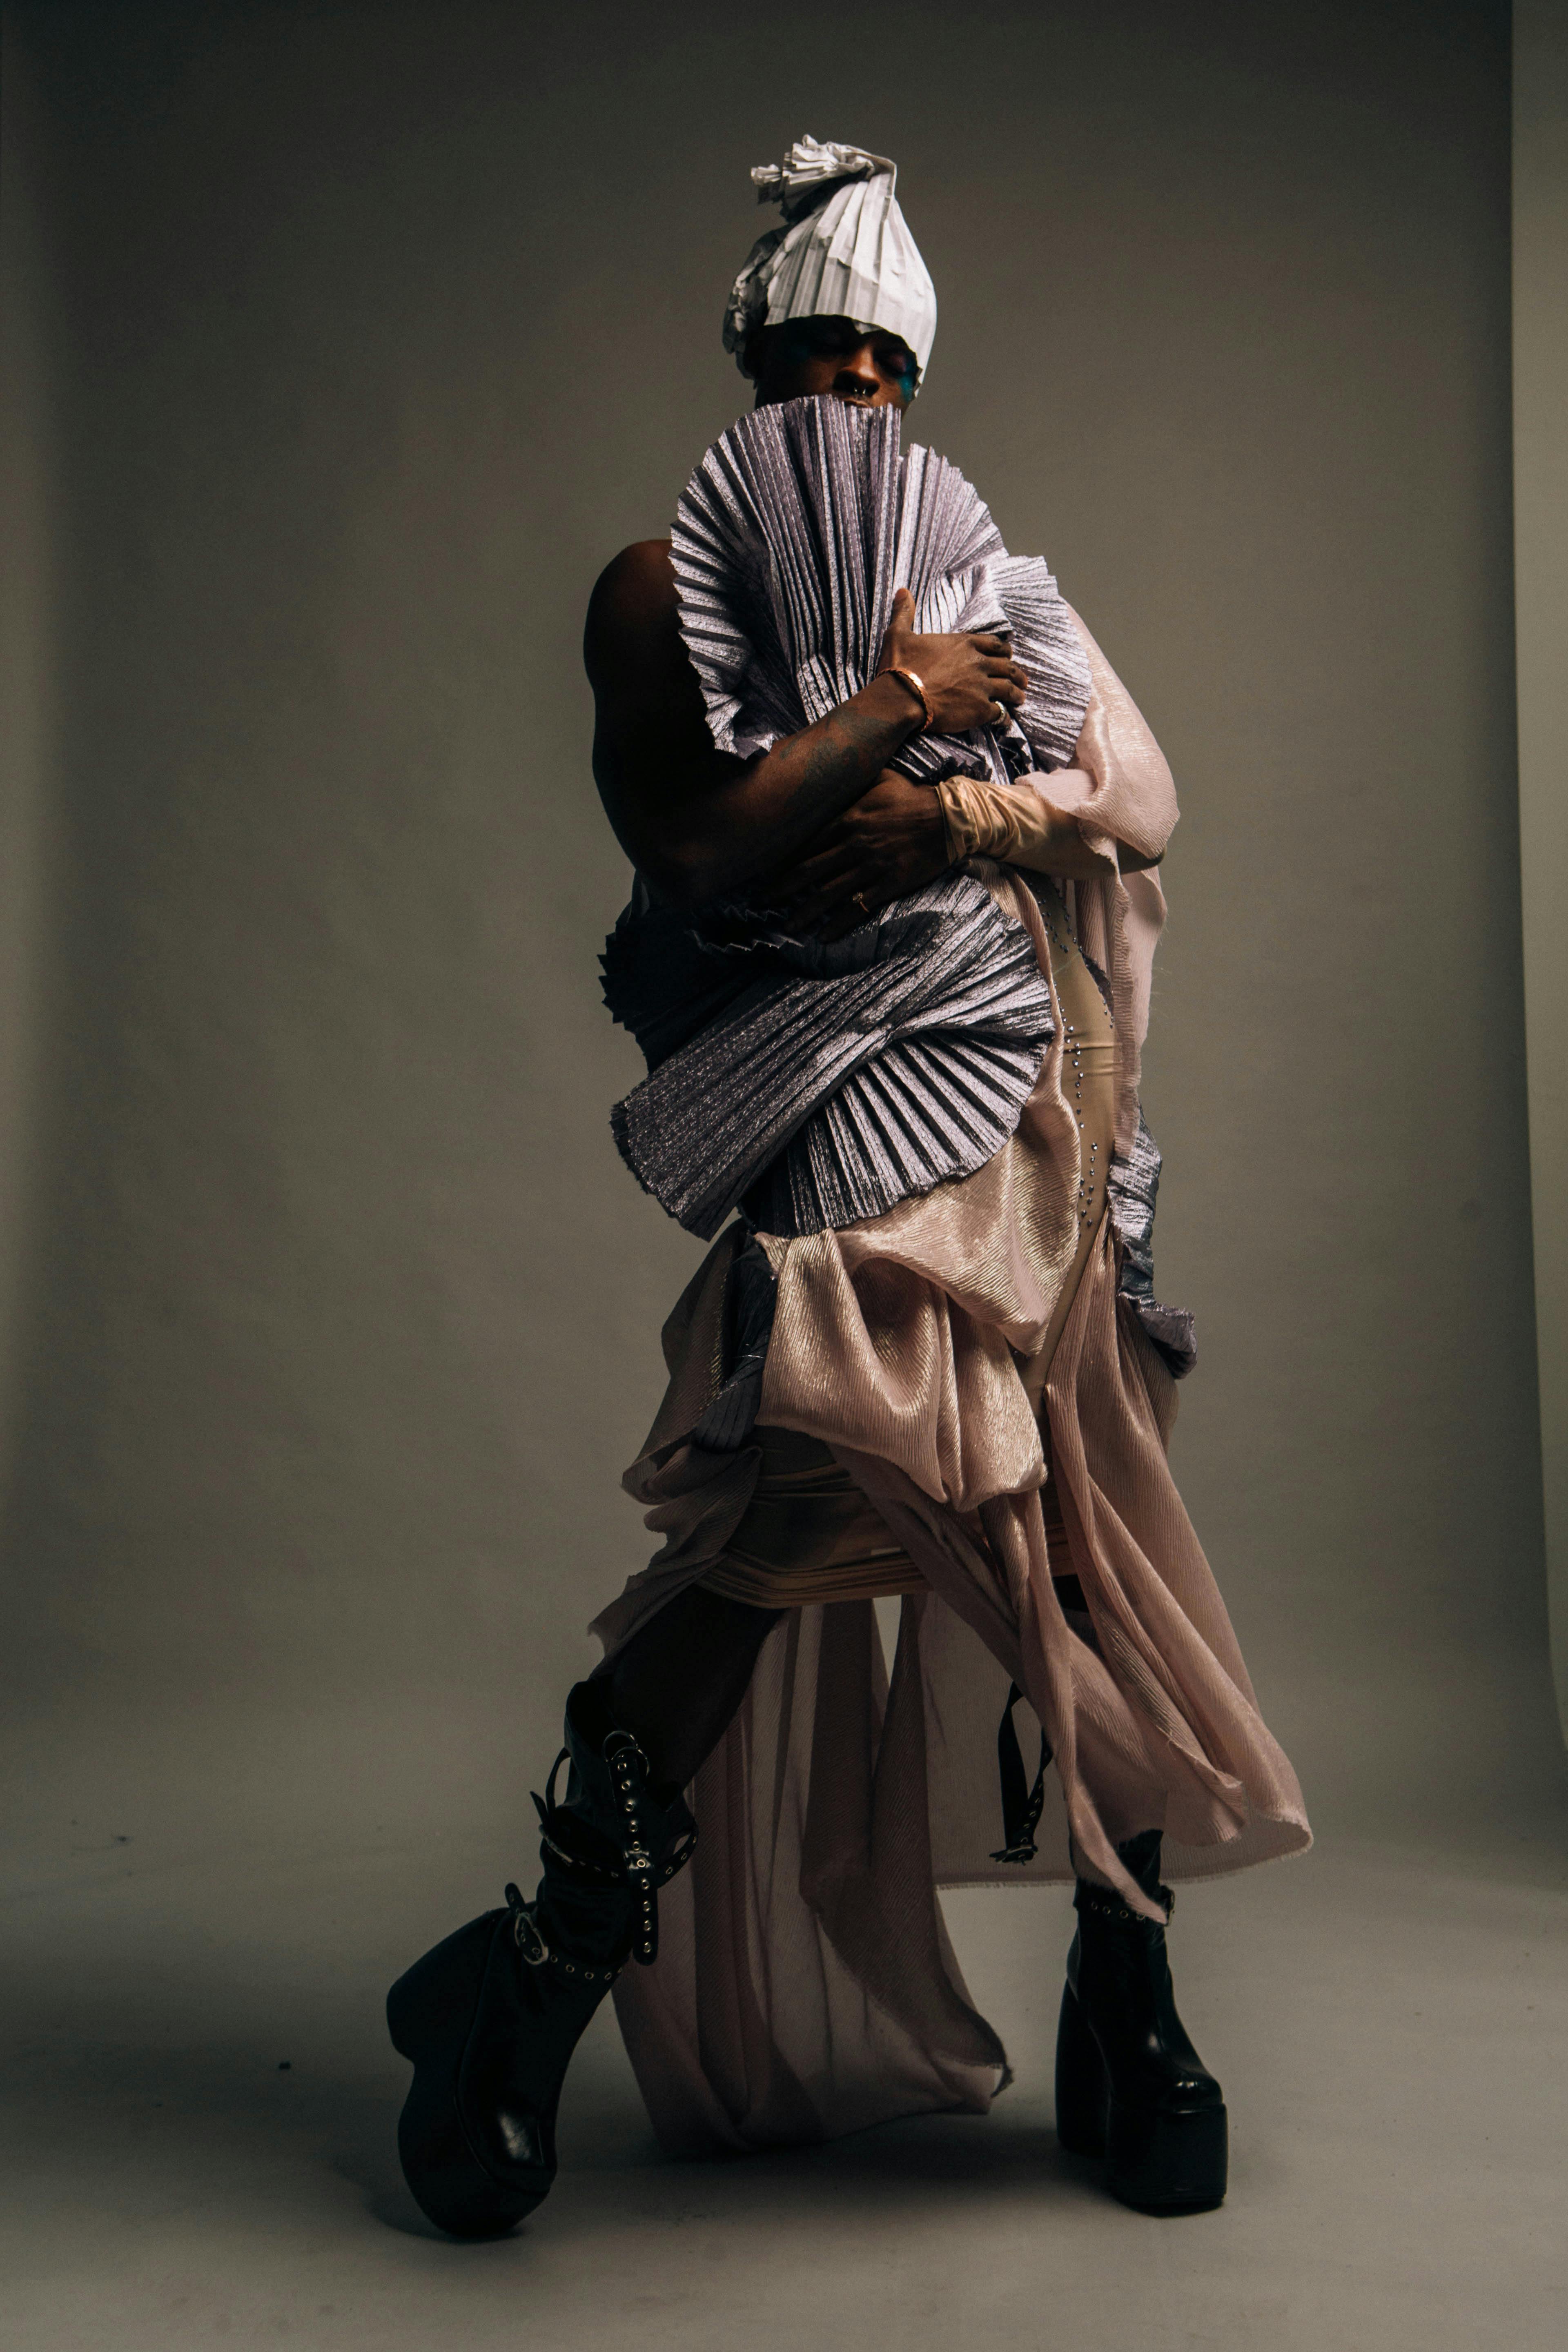 A picture taken for the logic magazine. A figure is clad in garb against a semigray dark background